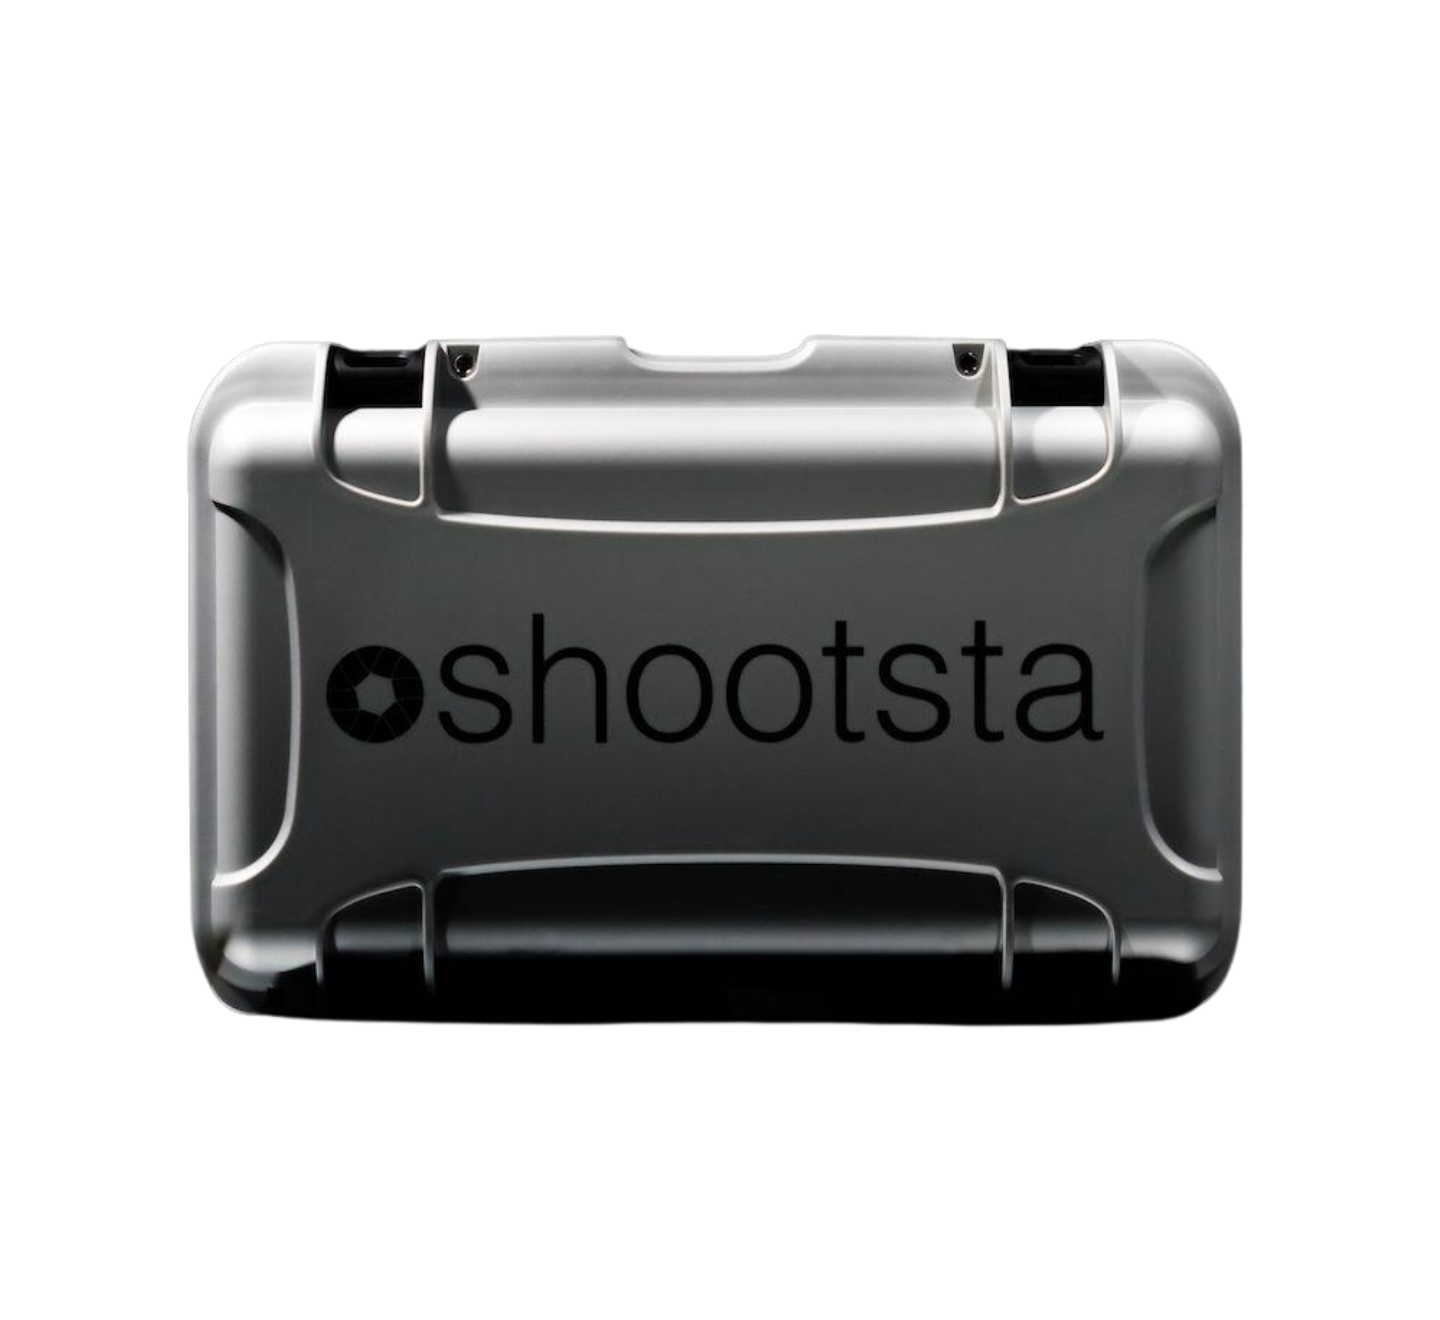 The Shootsta Kit Closed View with Branding